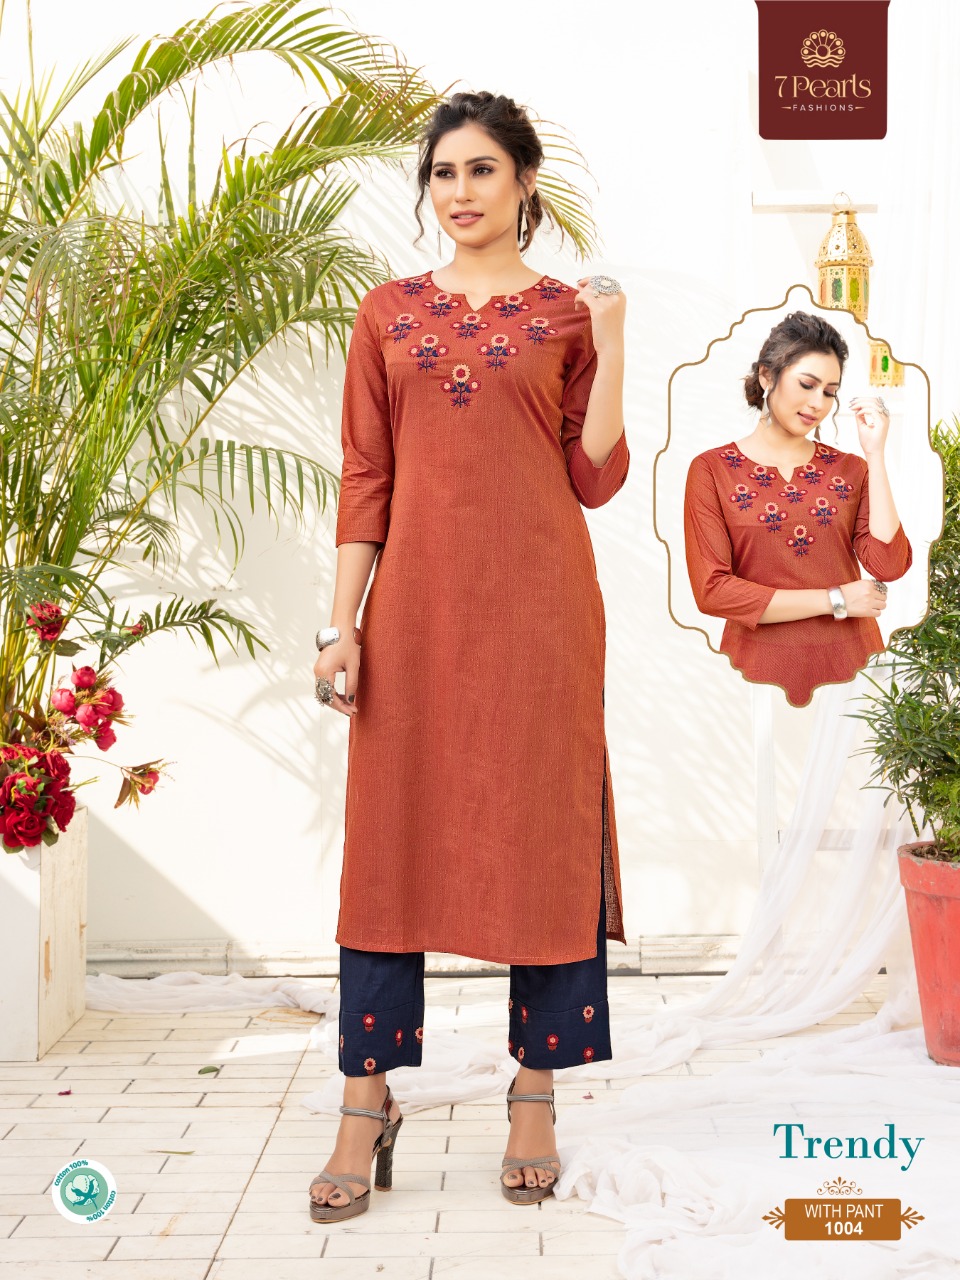 7 pearls trendy cotton authentic fabric kurti with pant catalog